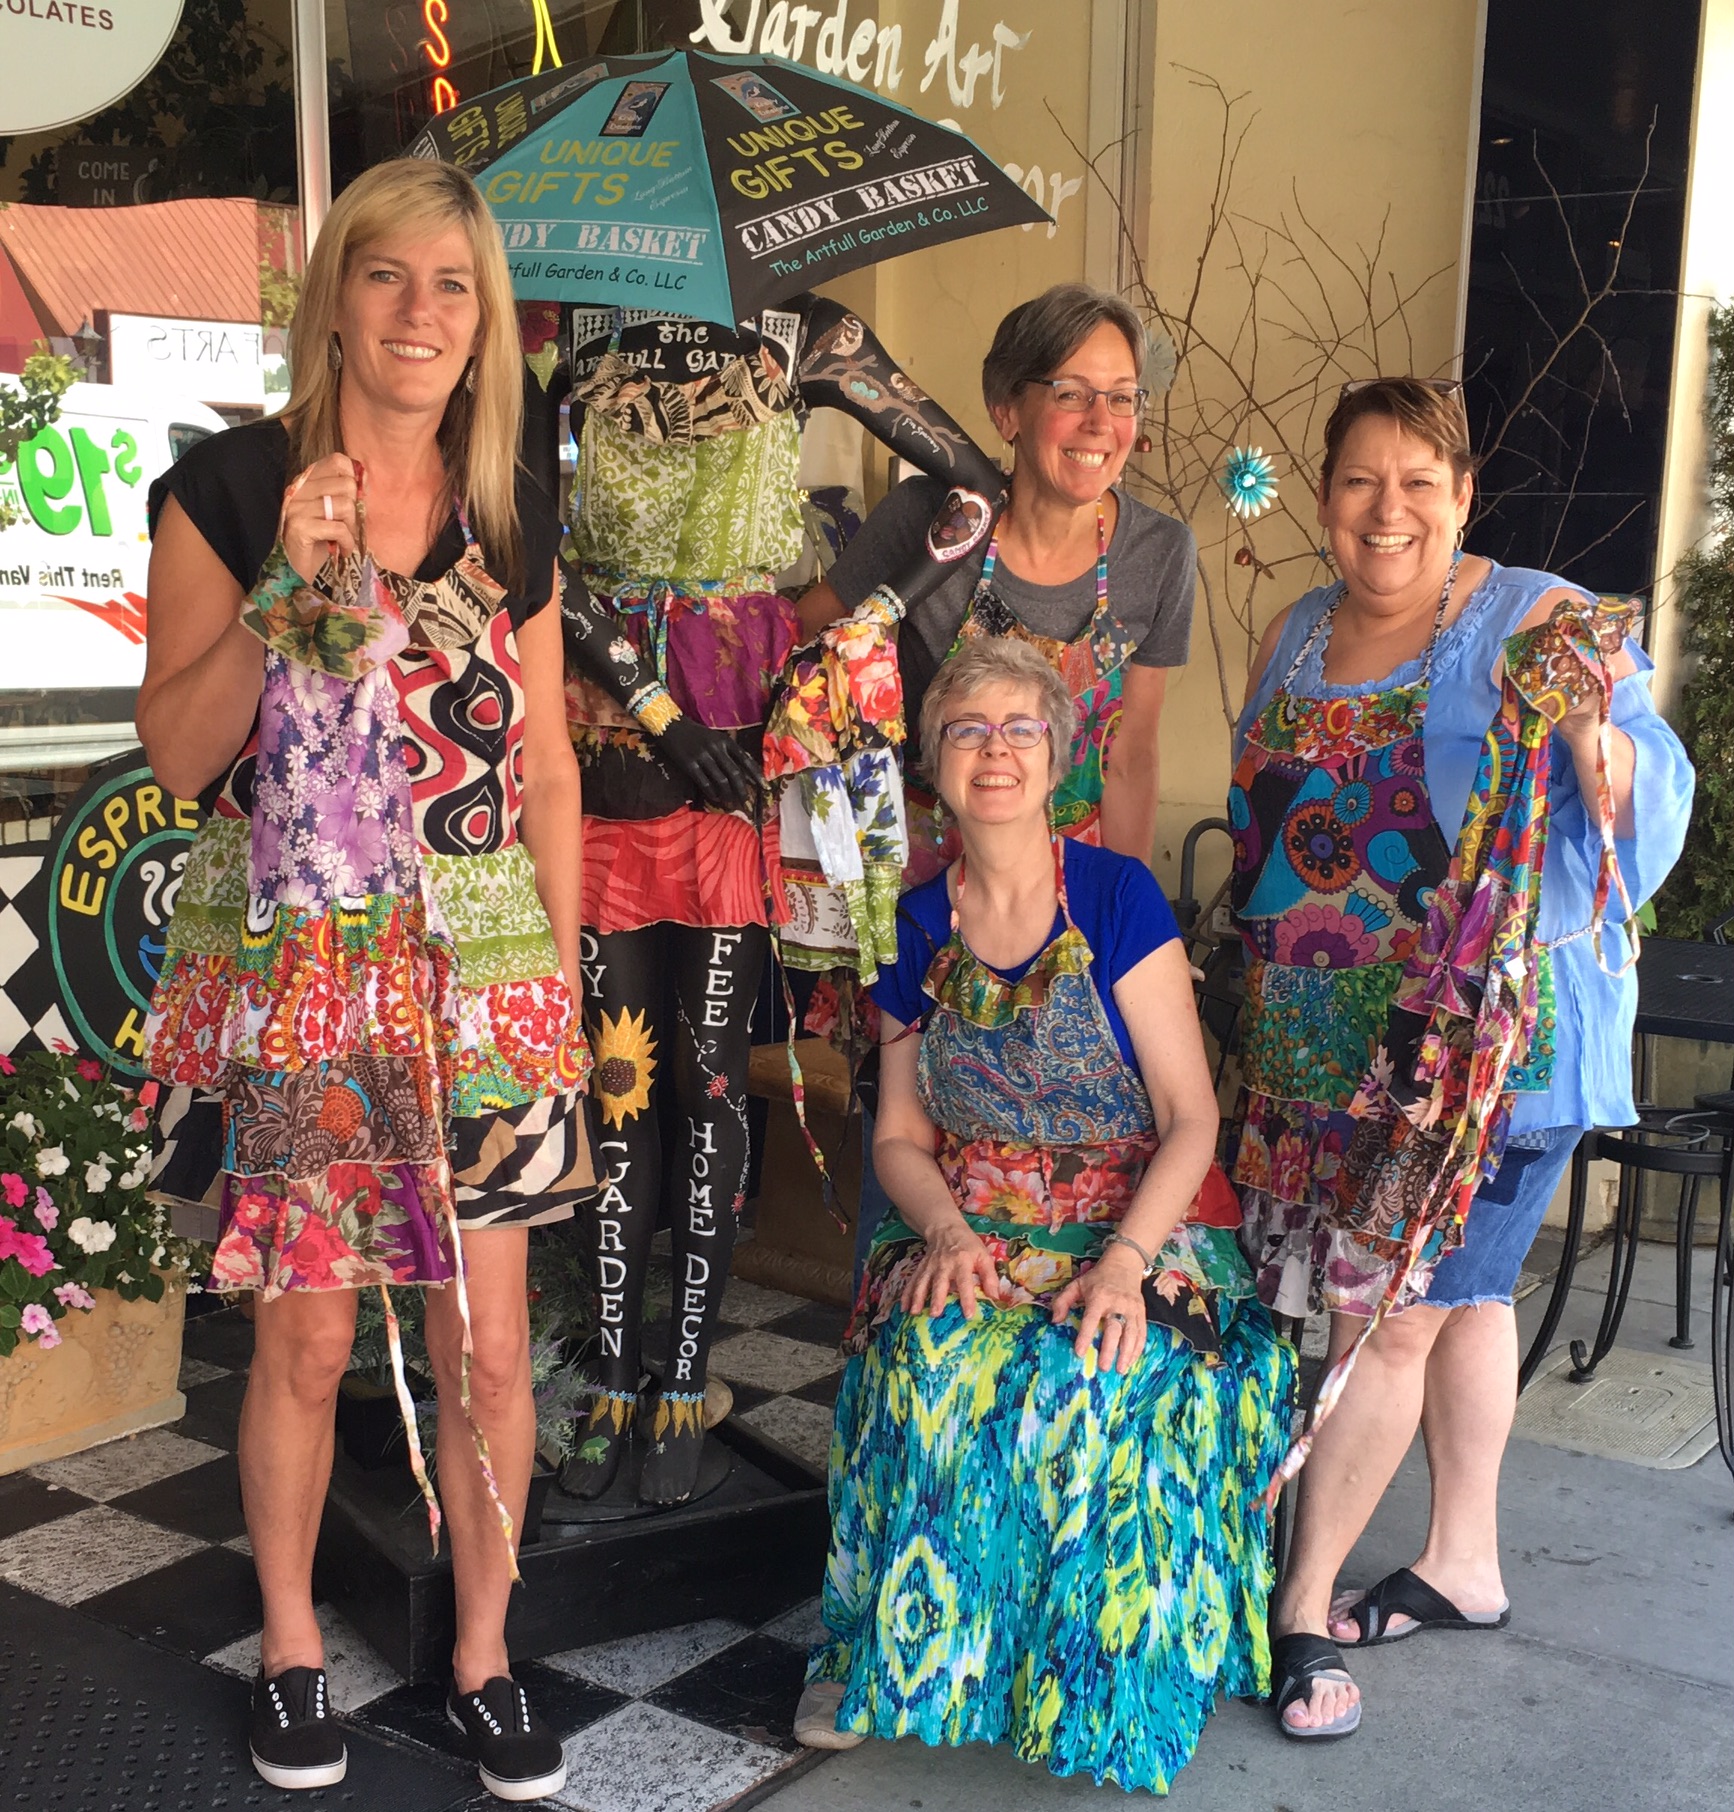 Our staff is committed to making your visit joyful!  We love to share stories about our talented art The Artfull Garden and Company, llc Hillsboro (503)648-7817